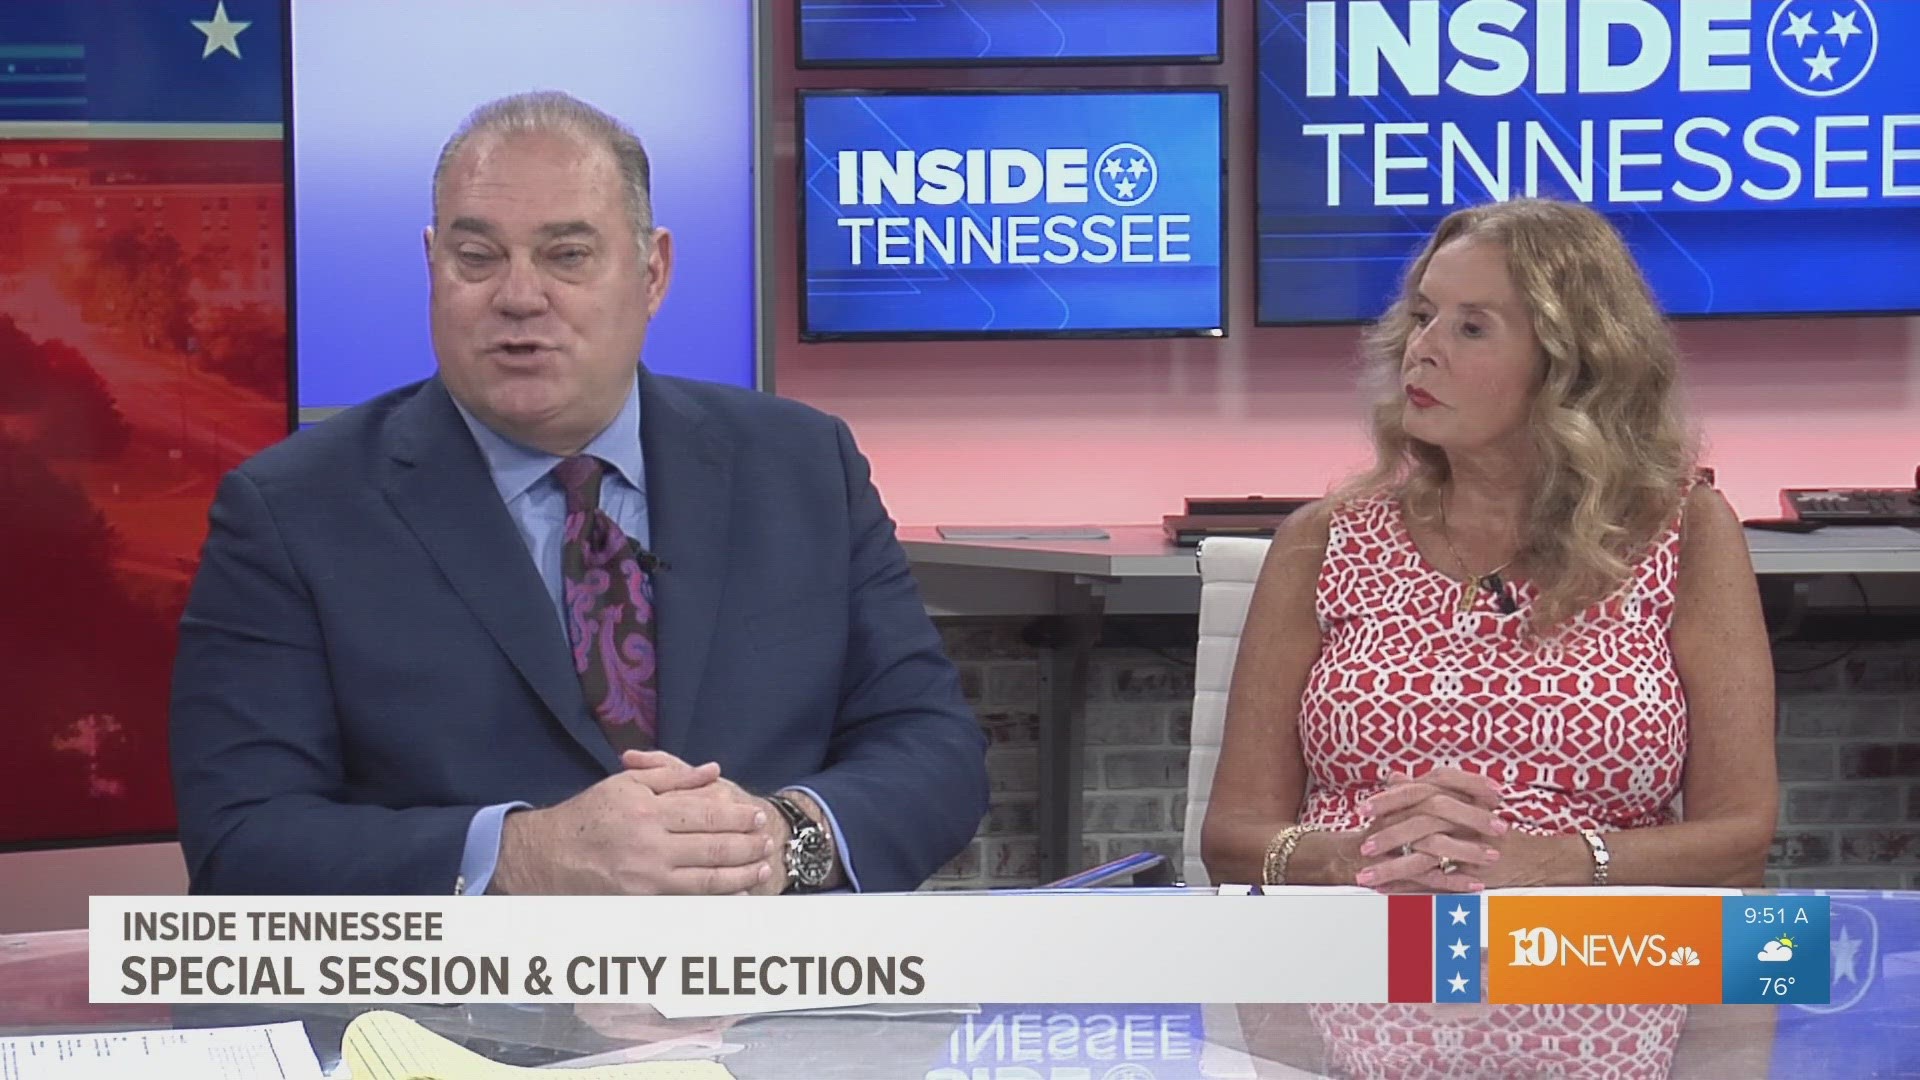 WBIR's panel talks about the Knoxville election and the ongoing special session.